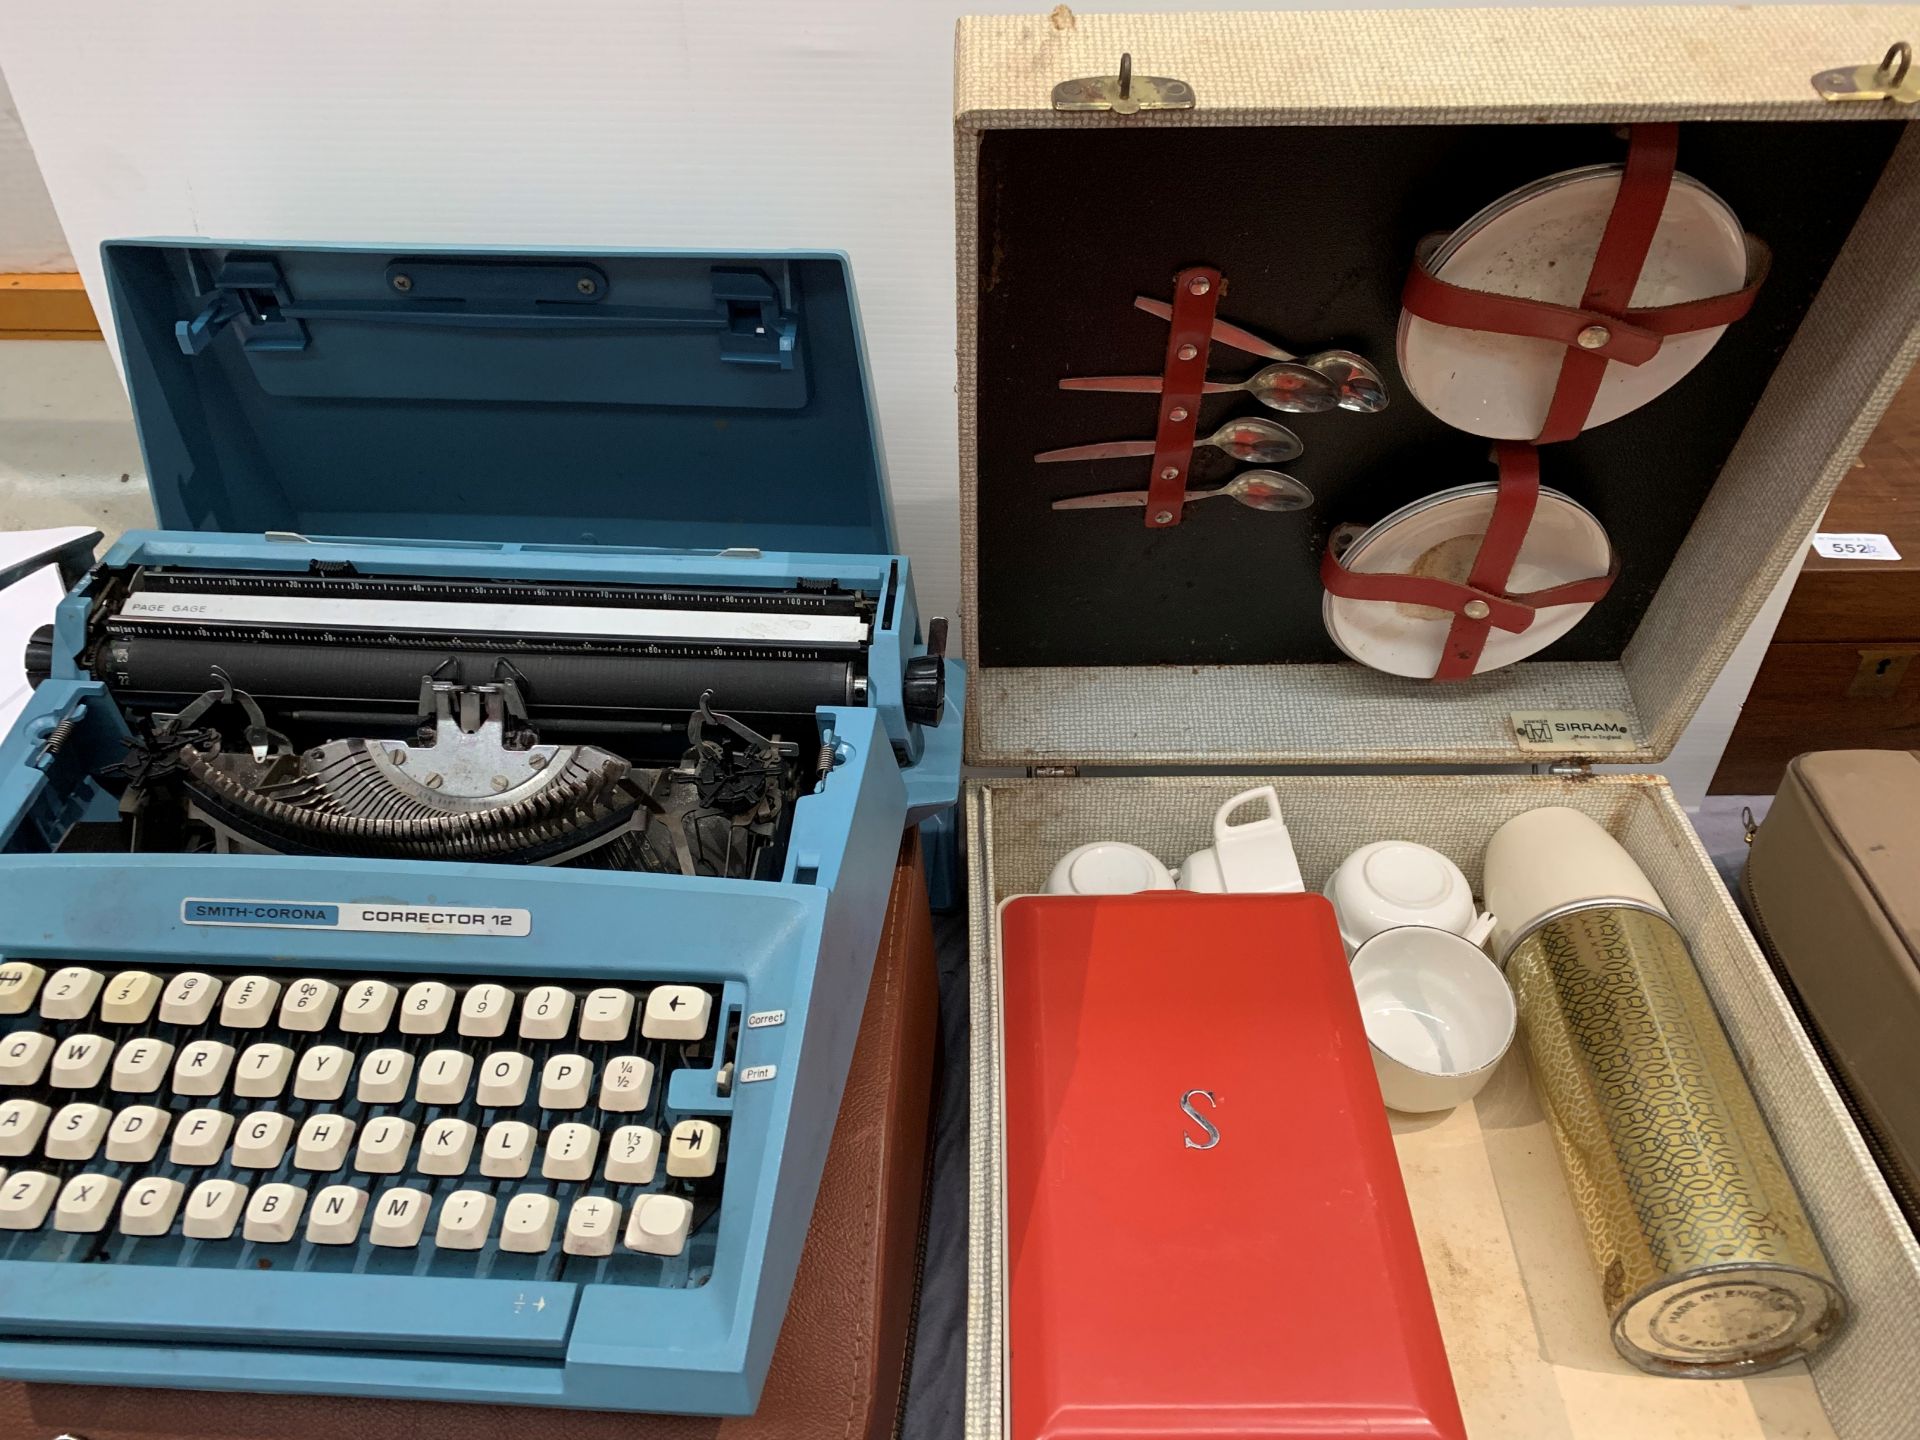 A Smith Corona Corrector 12 manual typewriter and a Sirram picnic set in case